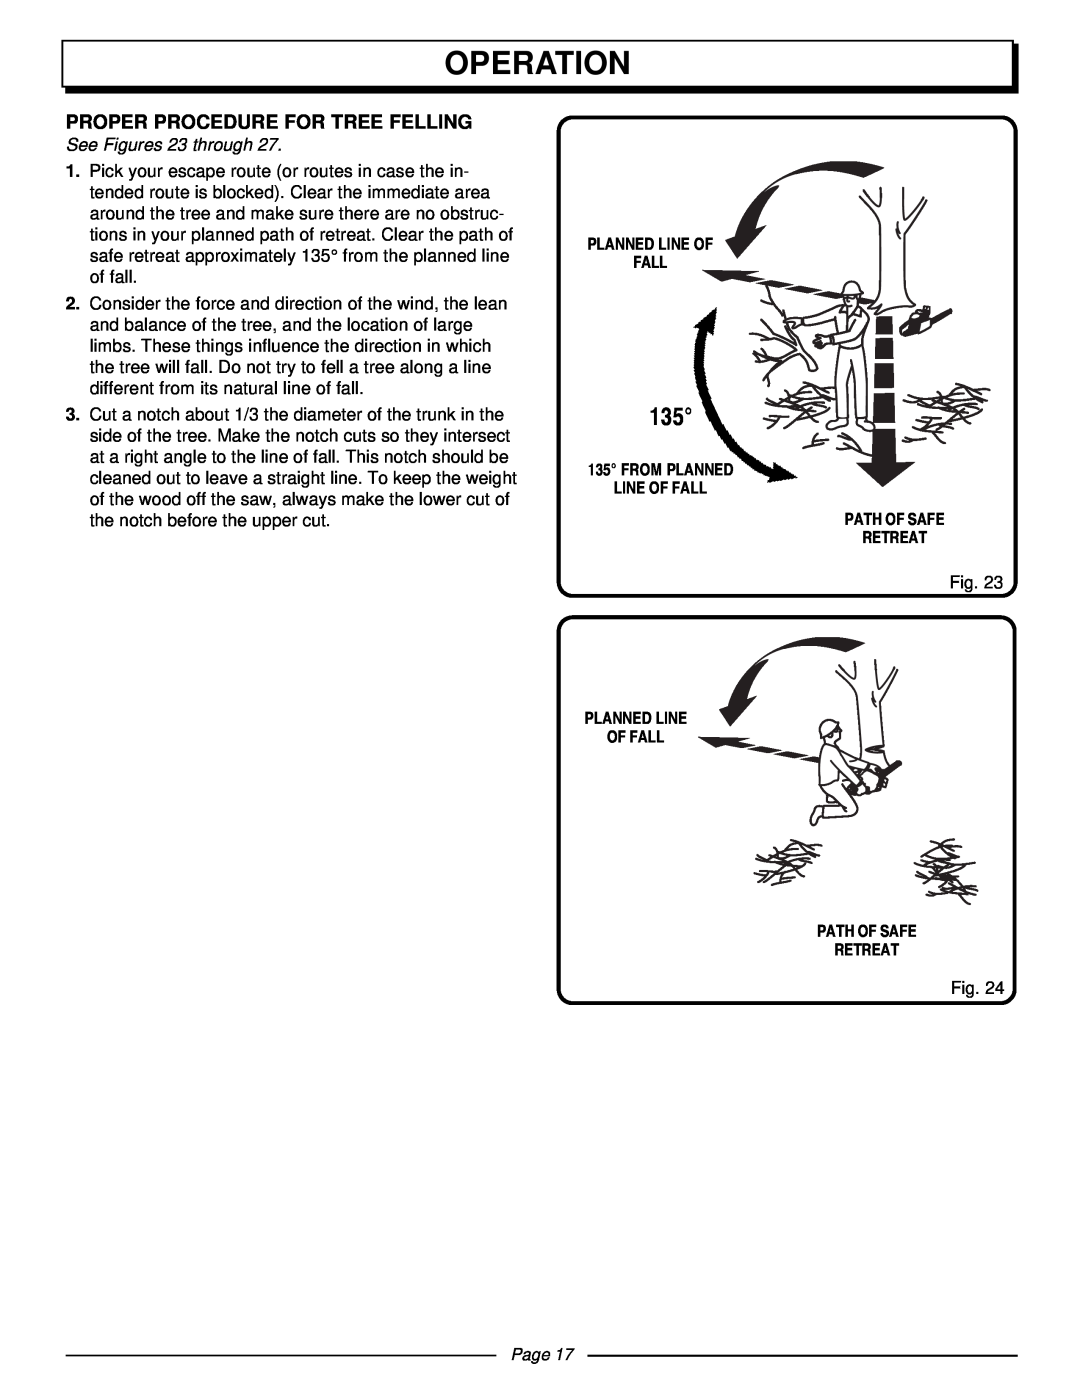 Homelite UT10510 manual Operation, Proper Procedure For Tree Felling, See Figures 23 through, Page 